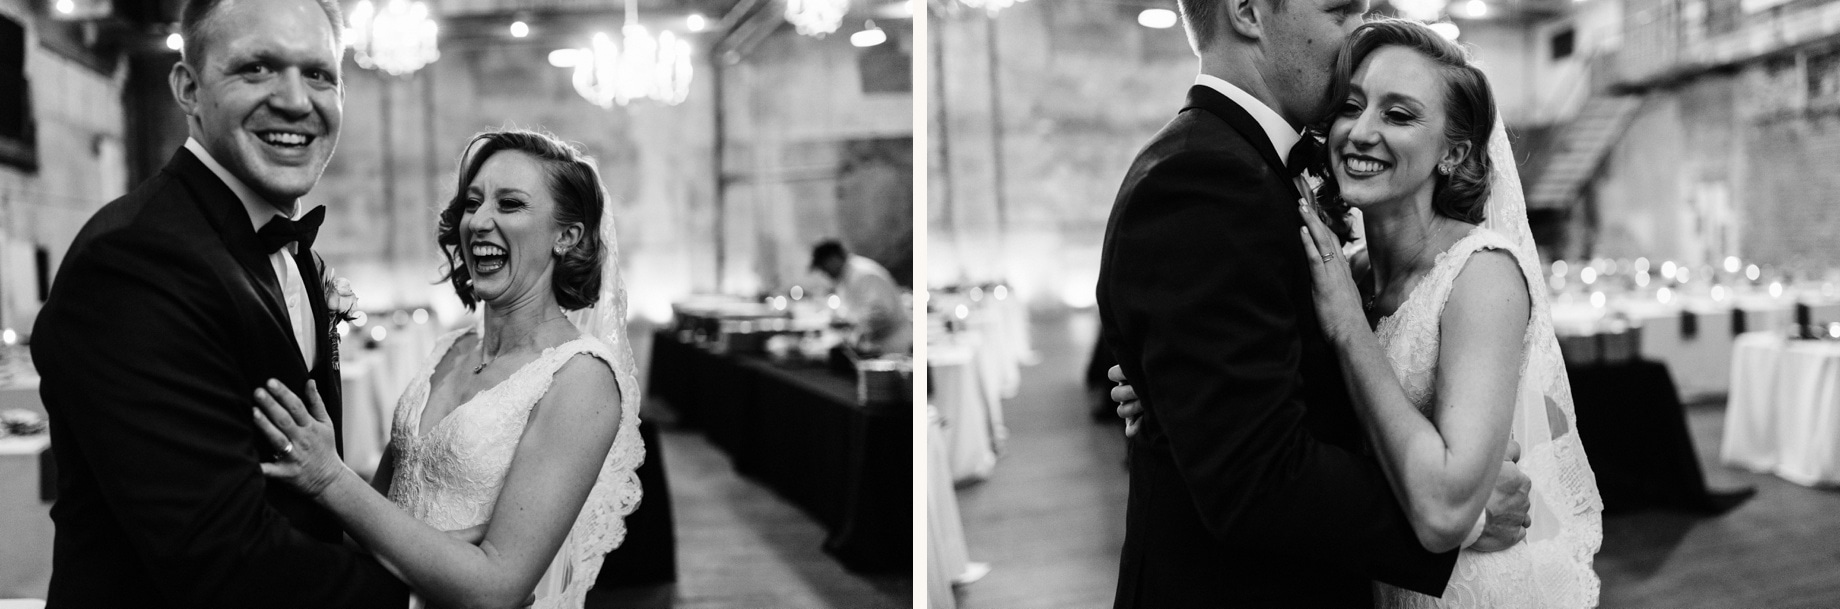 candid photos of a bride and groom after their wedding ceremony at the Jam Handy